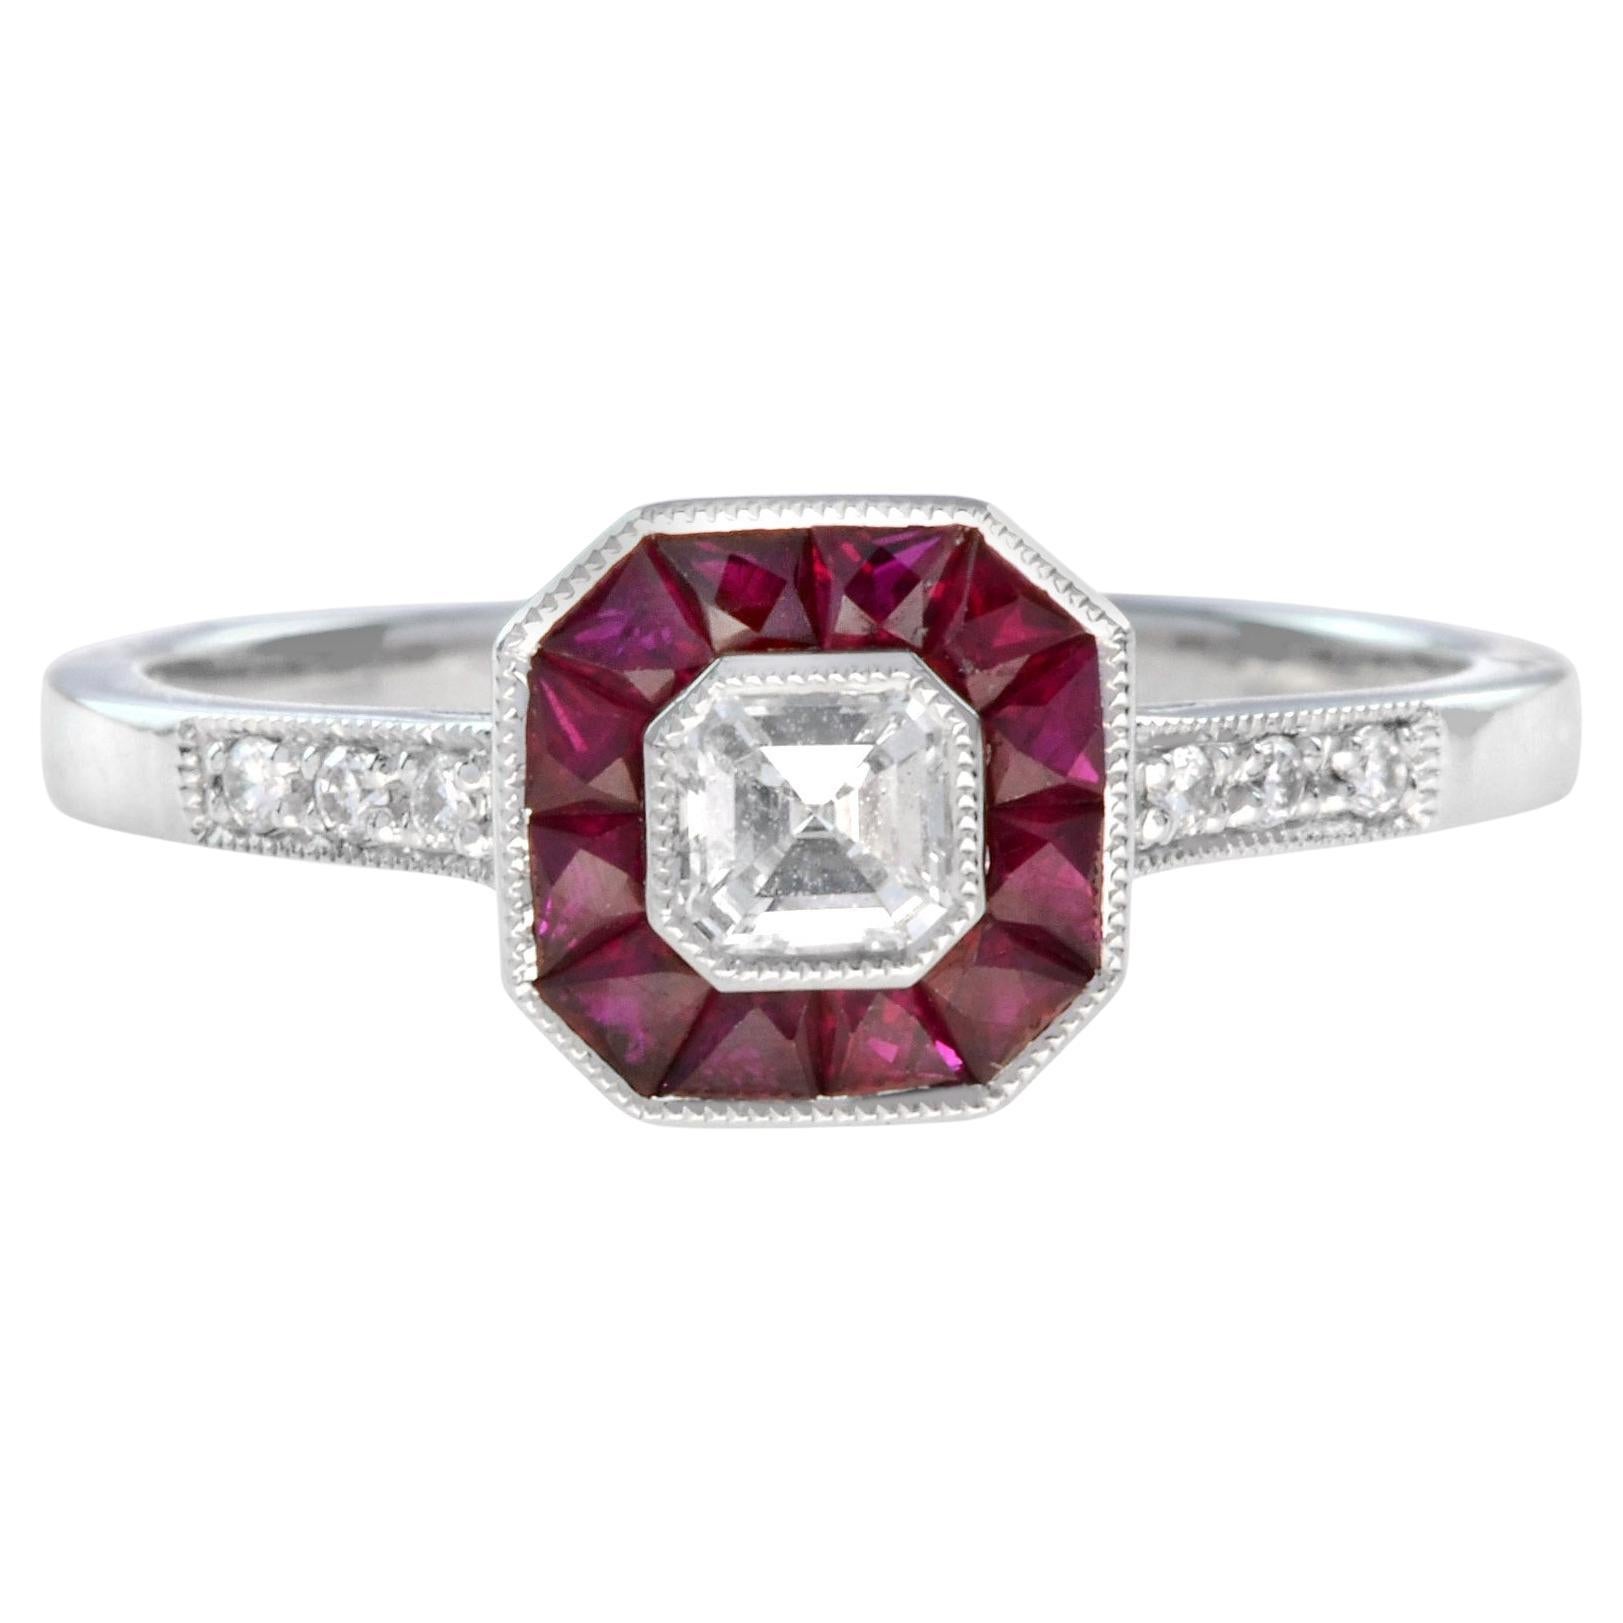 For Sale:  Nova Art Deco Style Emerald Cut Diamond and Ruby Target Ring in 14K White Gold